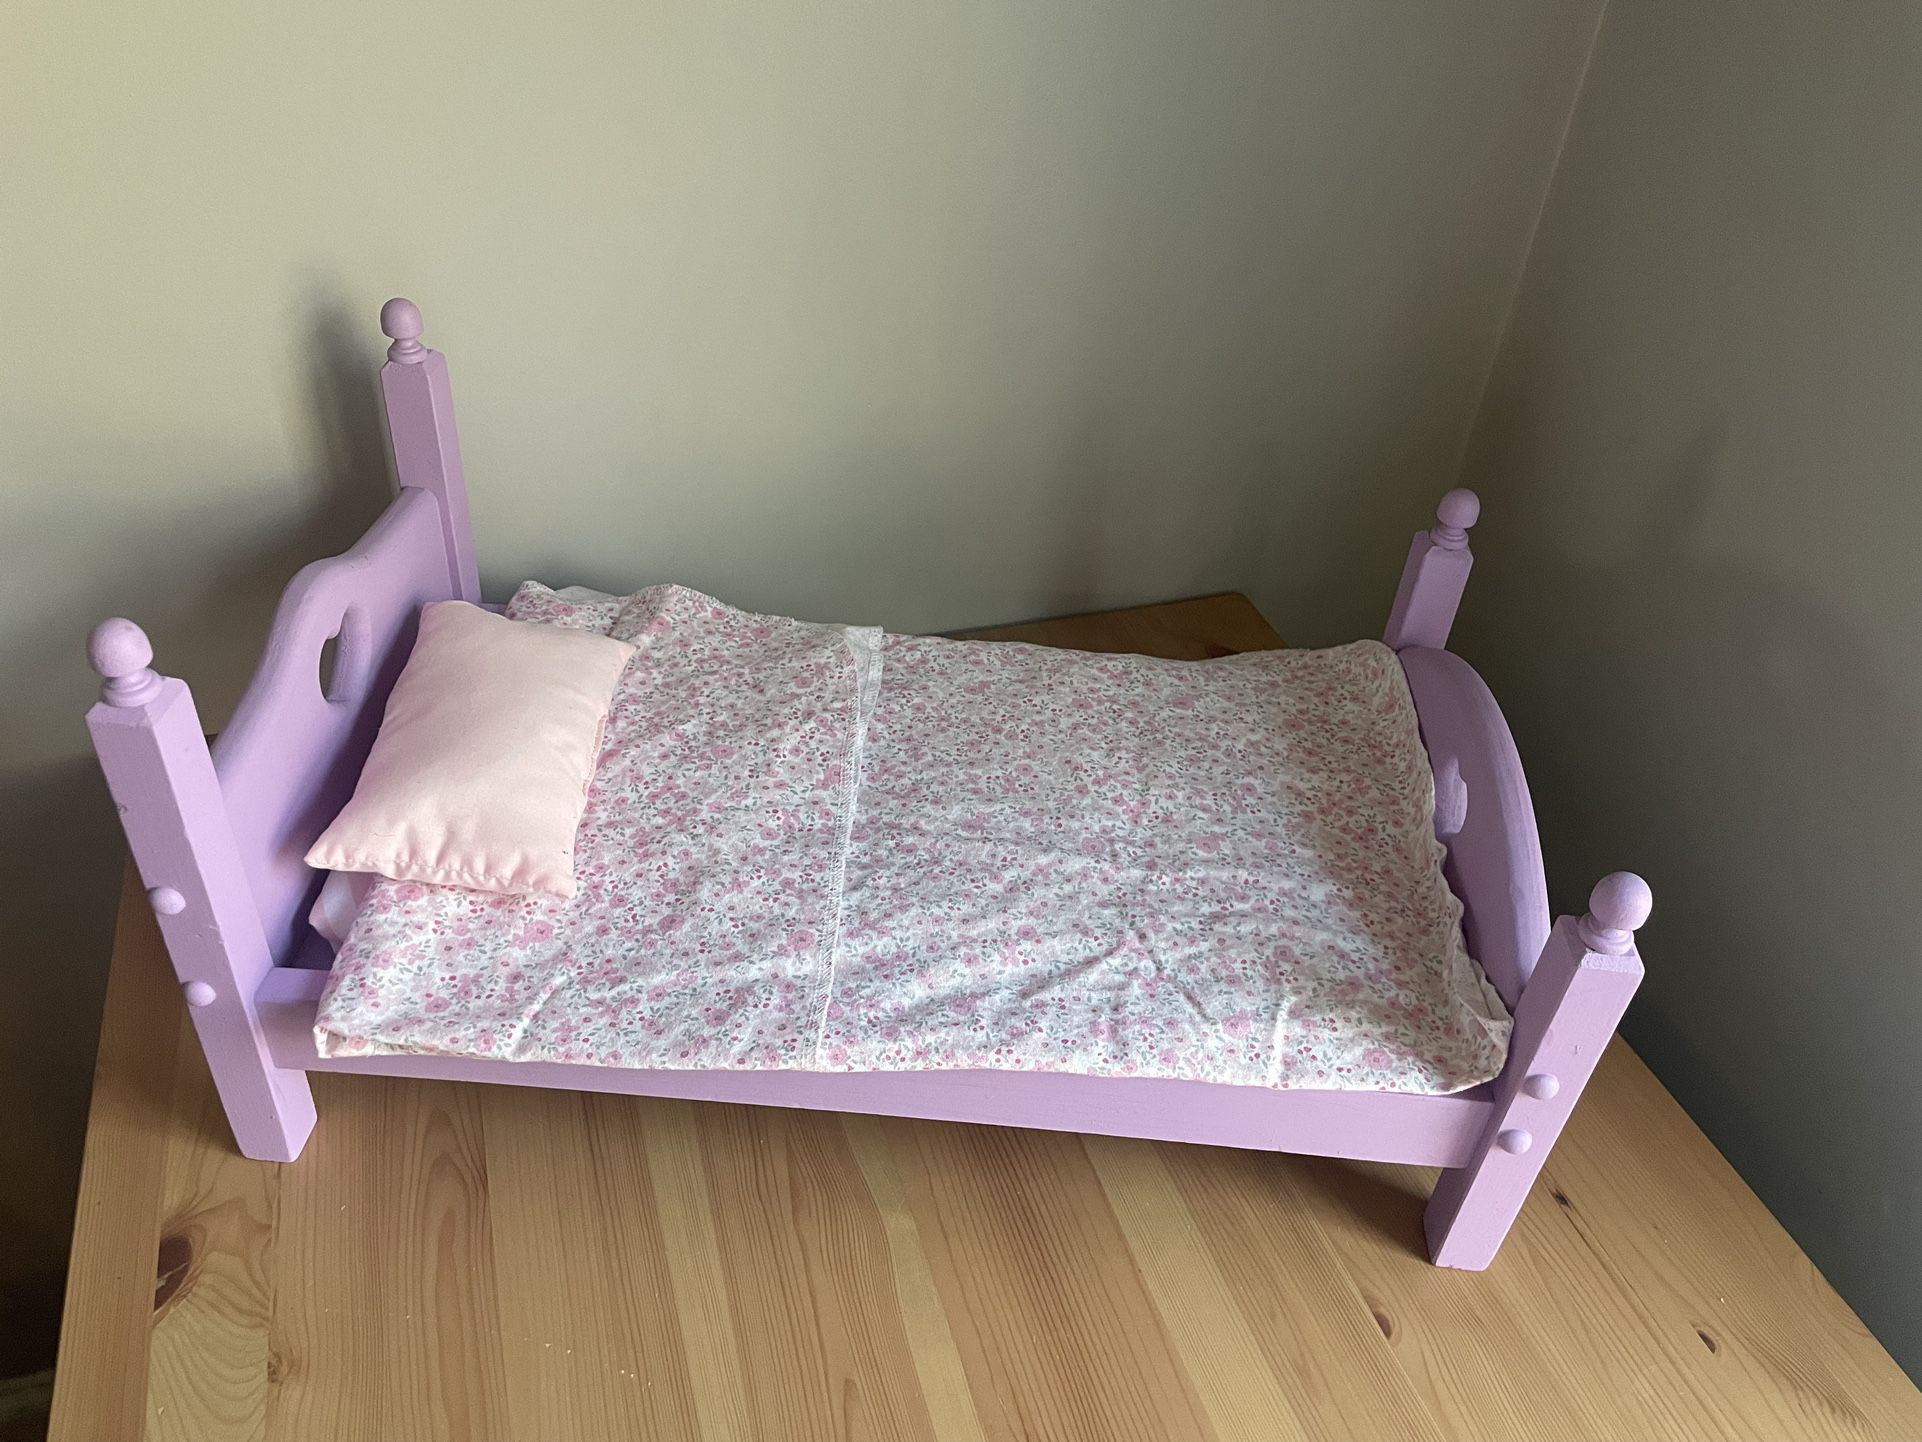 Wooden Doll Bed For 18” Baby Dolls Fits American Girl Doll 